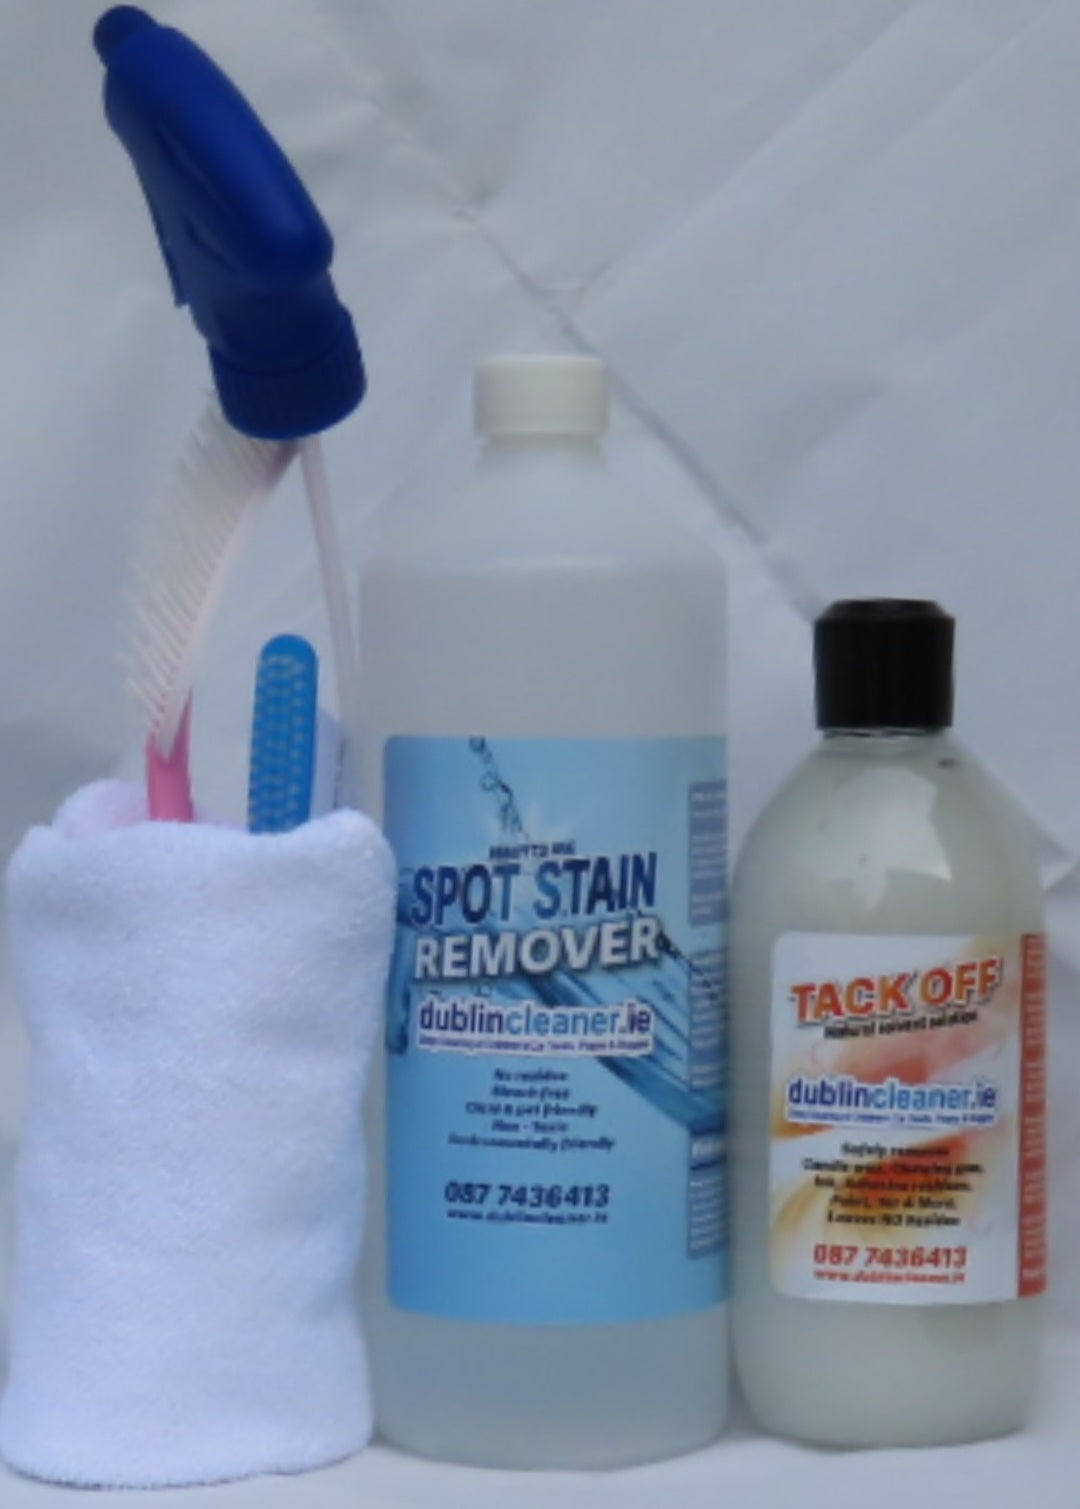 Resume packing 4th March - Happy Clean Bundle - 1ltr Spot Stain Remover & 500ml Tack Off